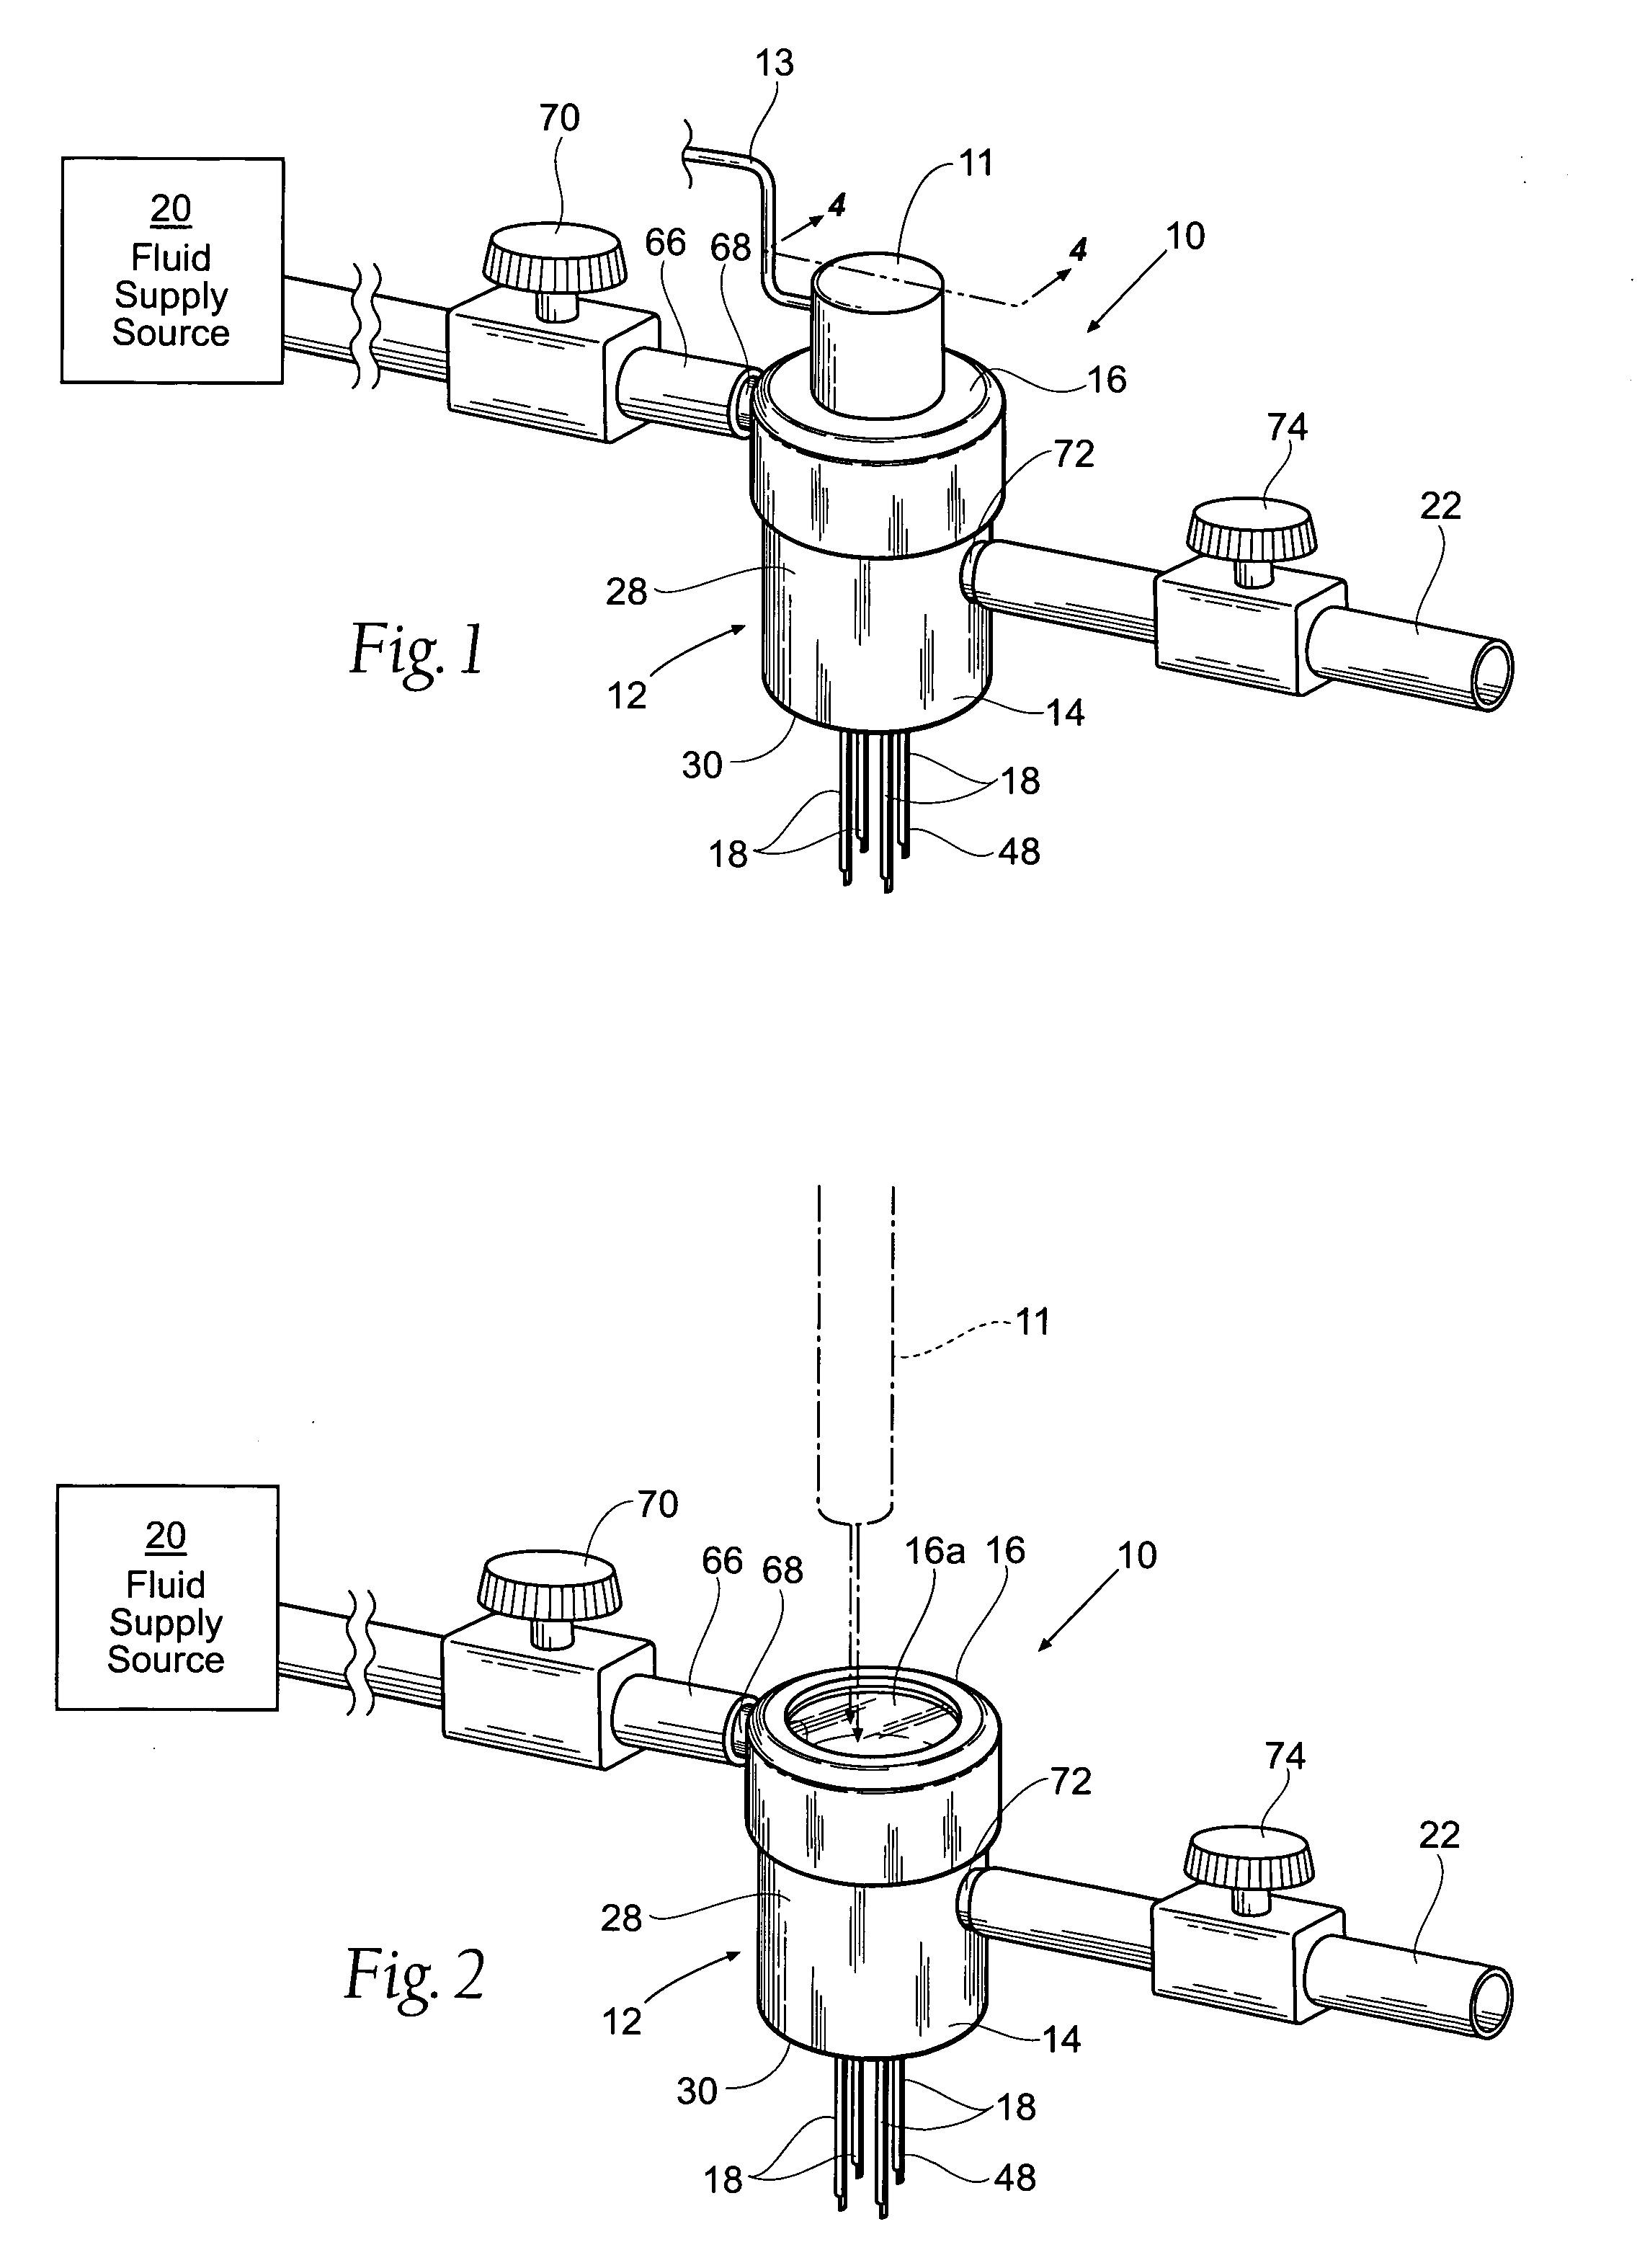 Apparatus and methods for treating tooth root canals